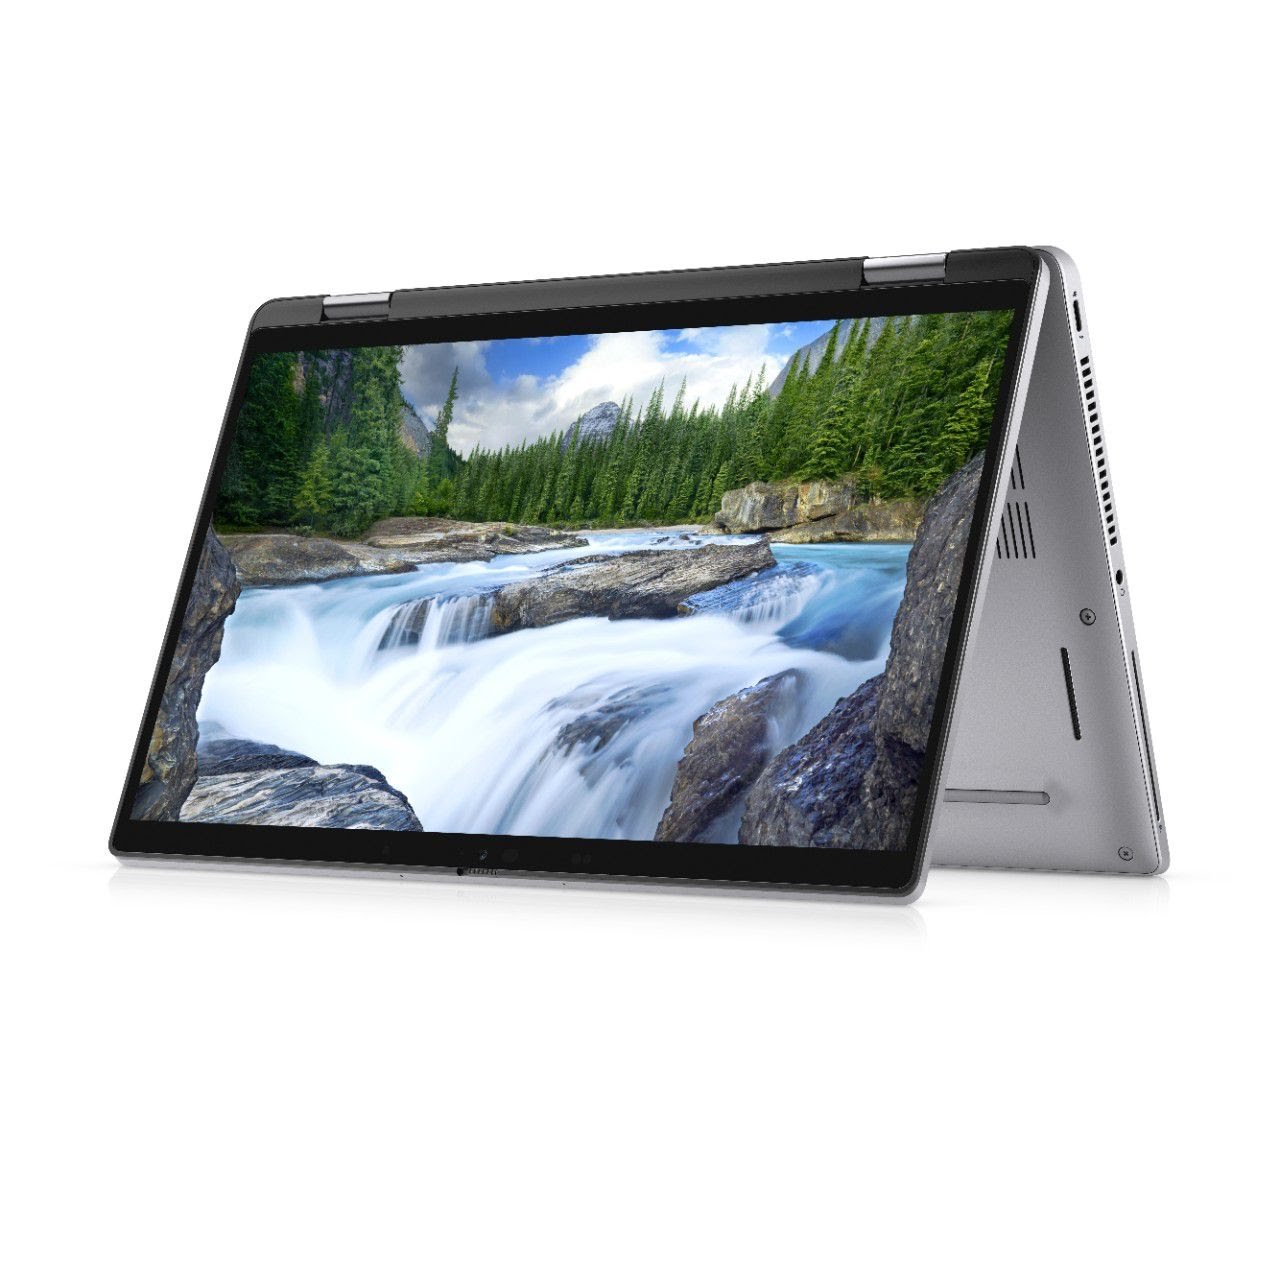 Dell launches new Latitude, Precision, and OptiPlex laptops and PCs in India